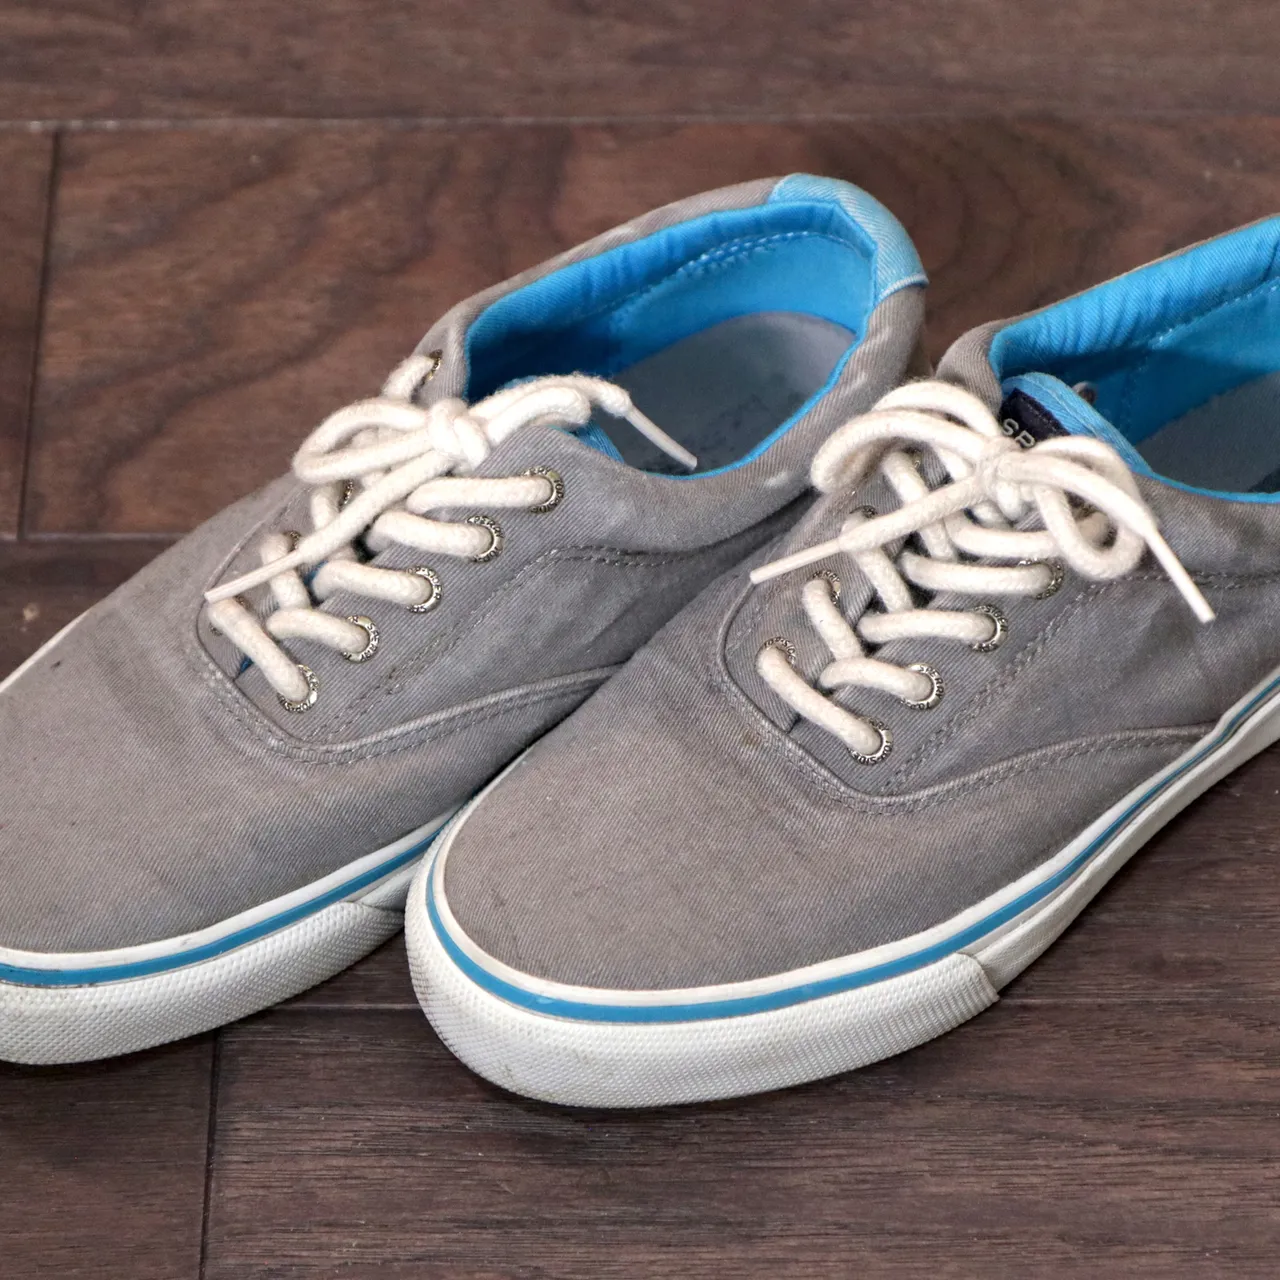 Sperry Top-Sider grey boat shoes photo 1